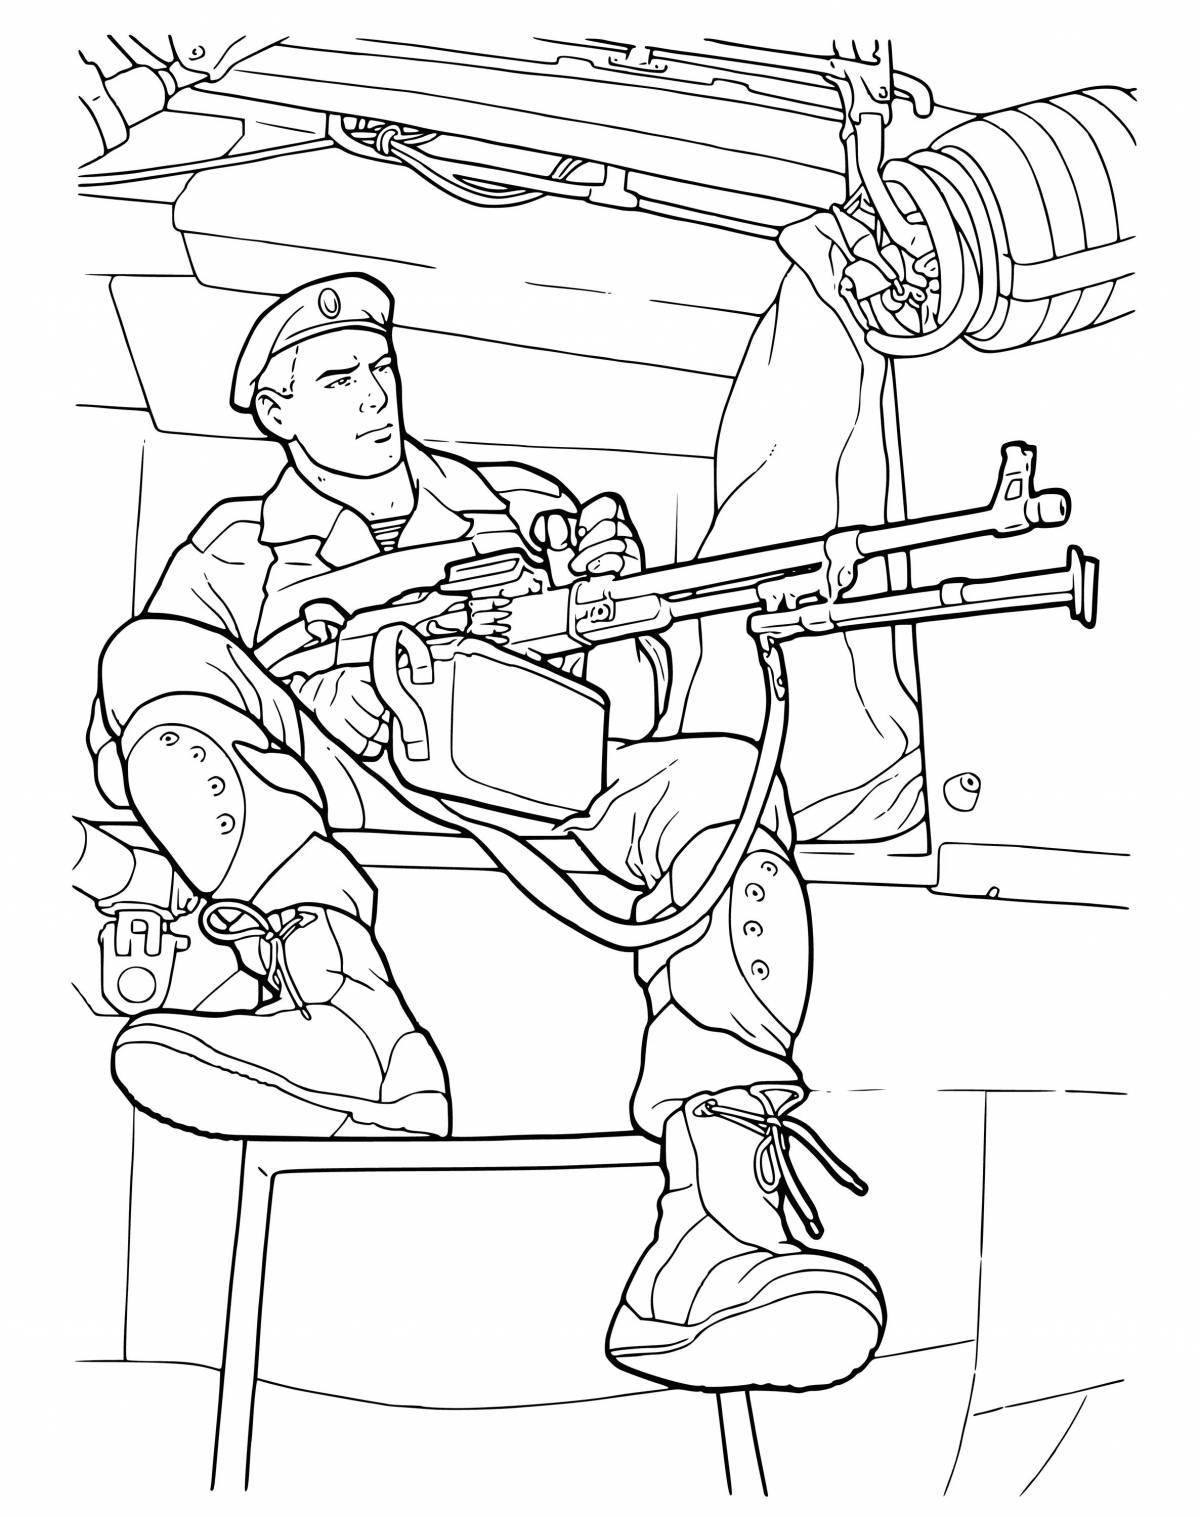 Zany paratrooper coloring book for little ones